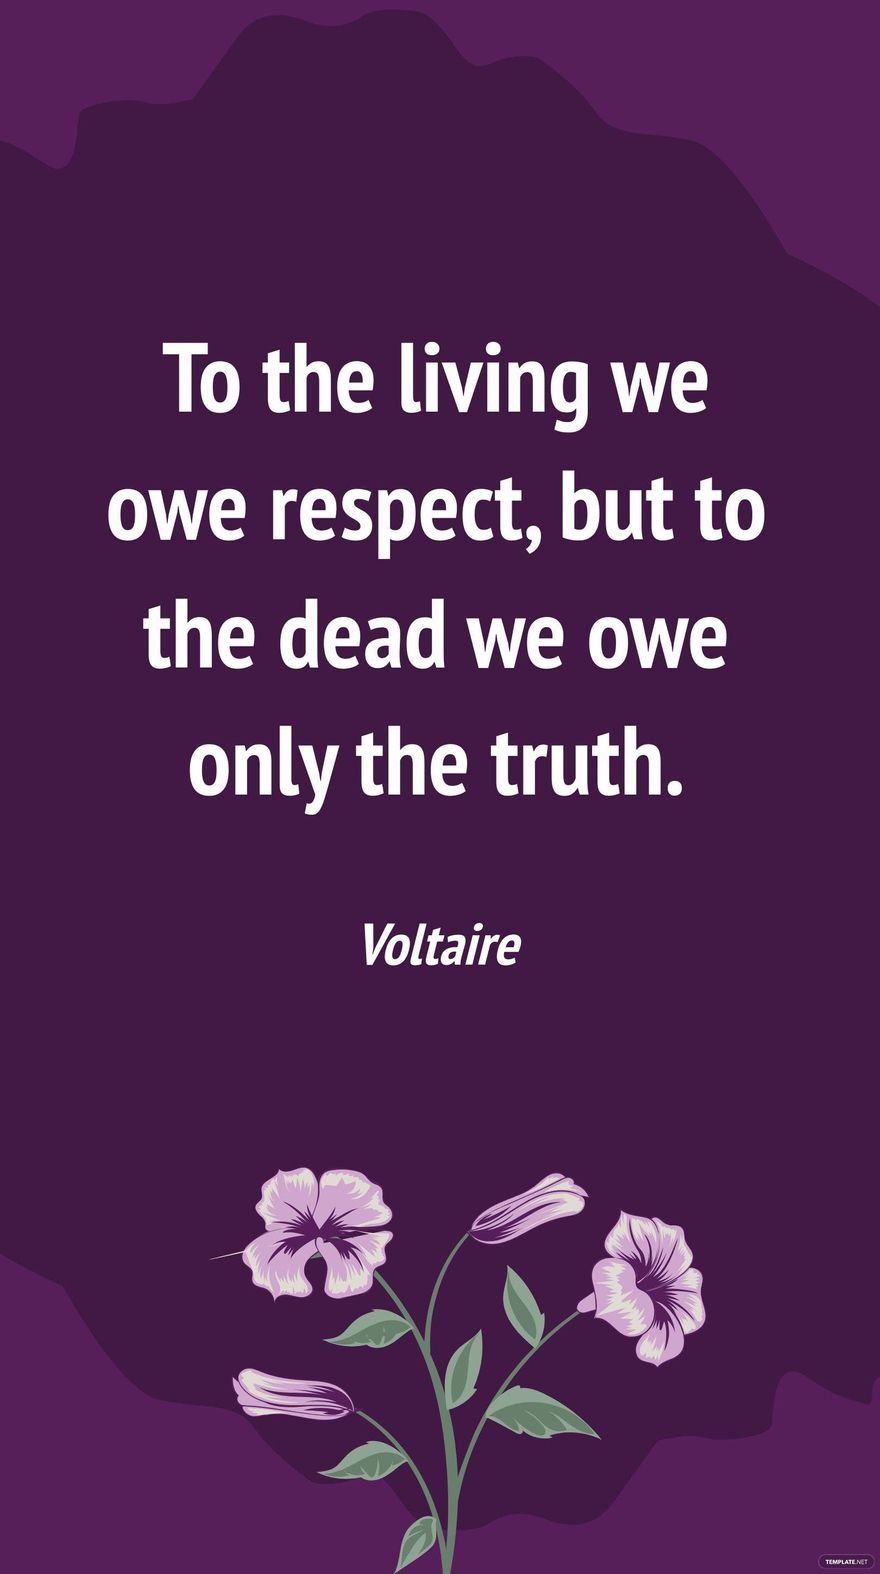 Voltaire - To the living we owe respect, but to the dead we owe only the truth.